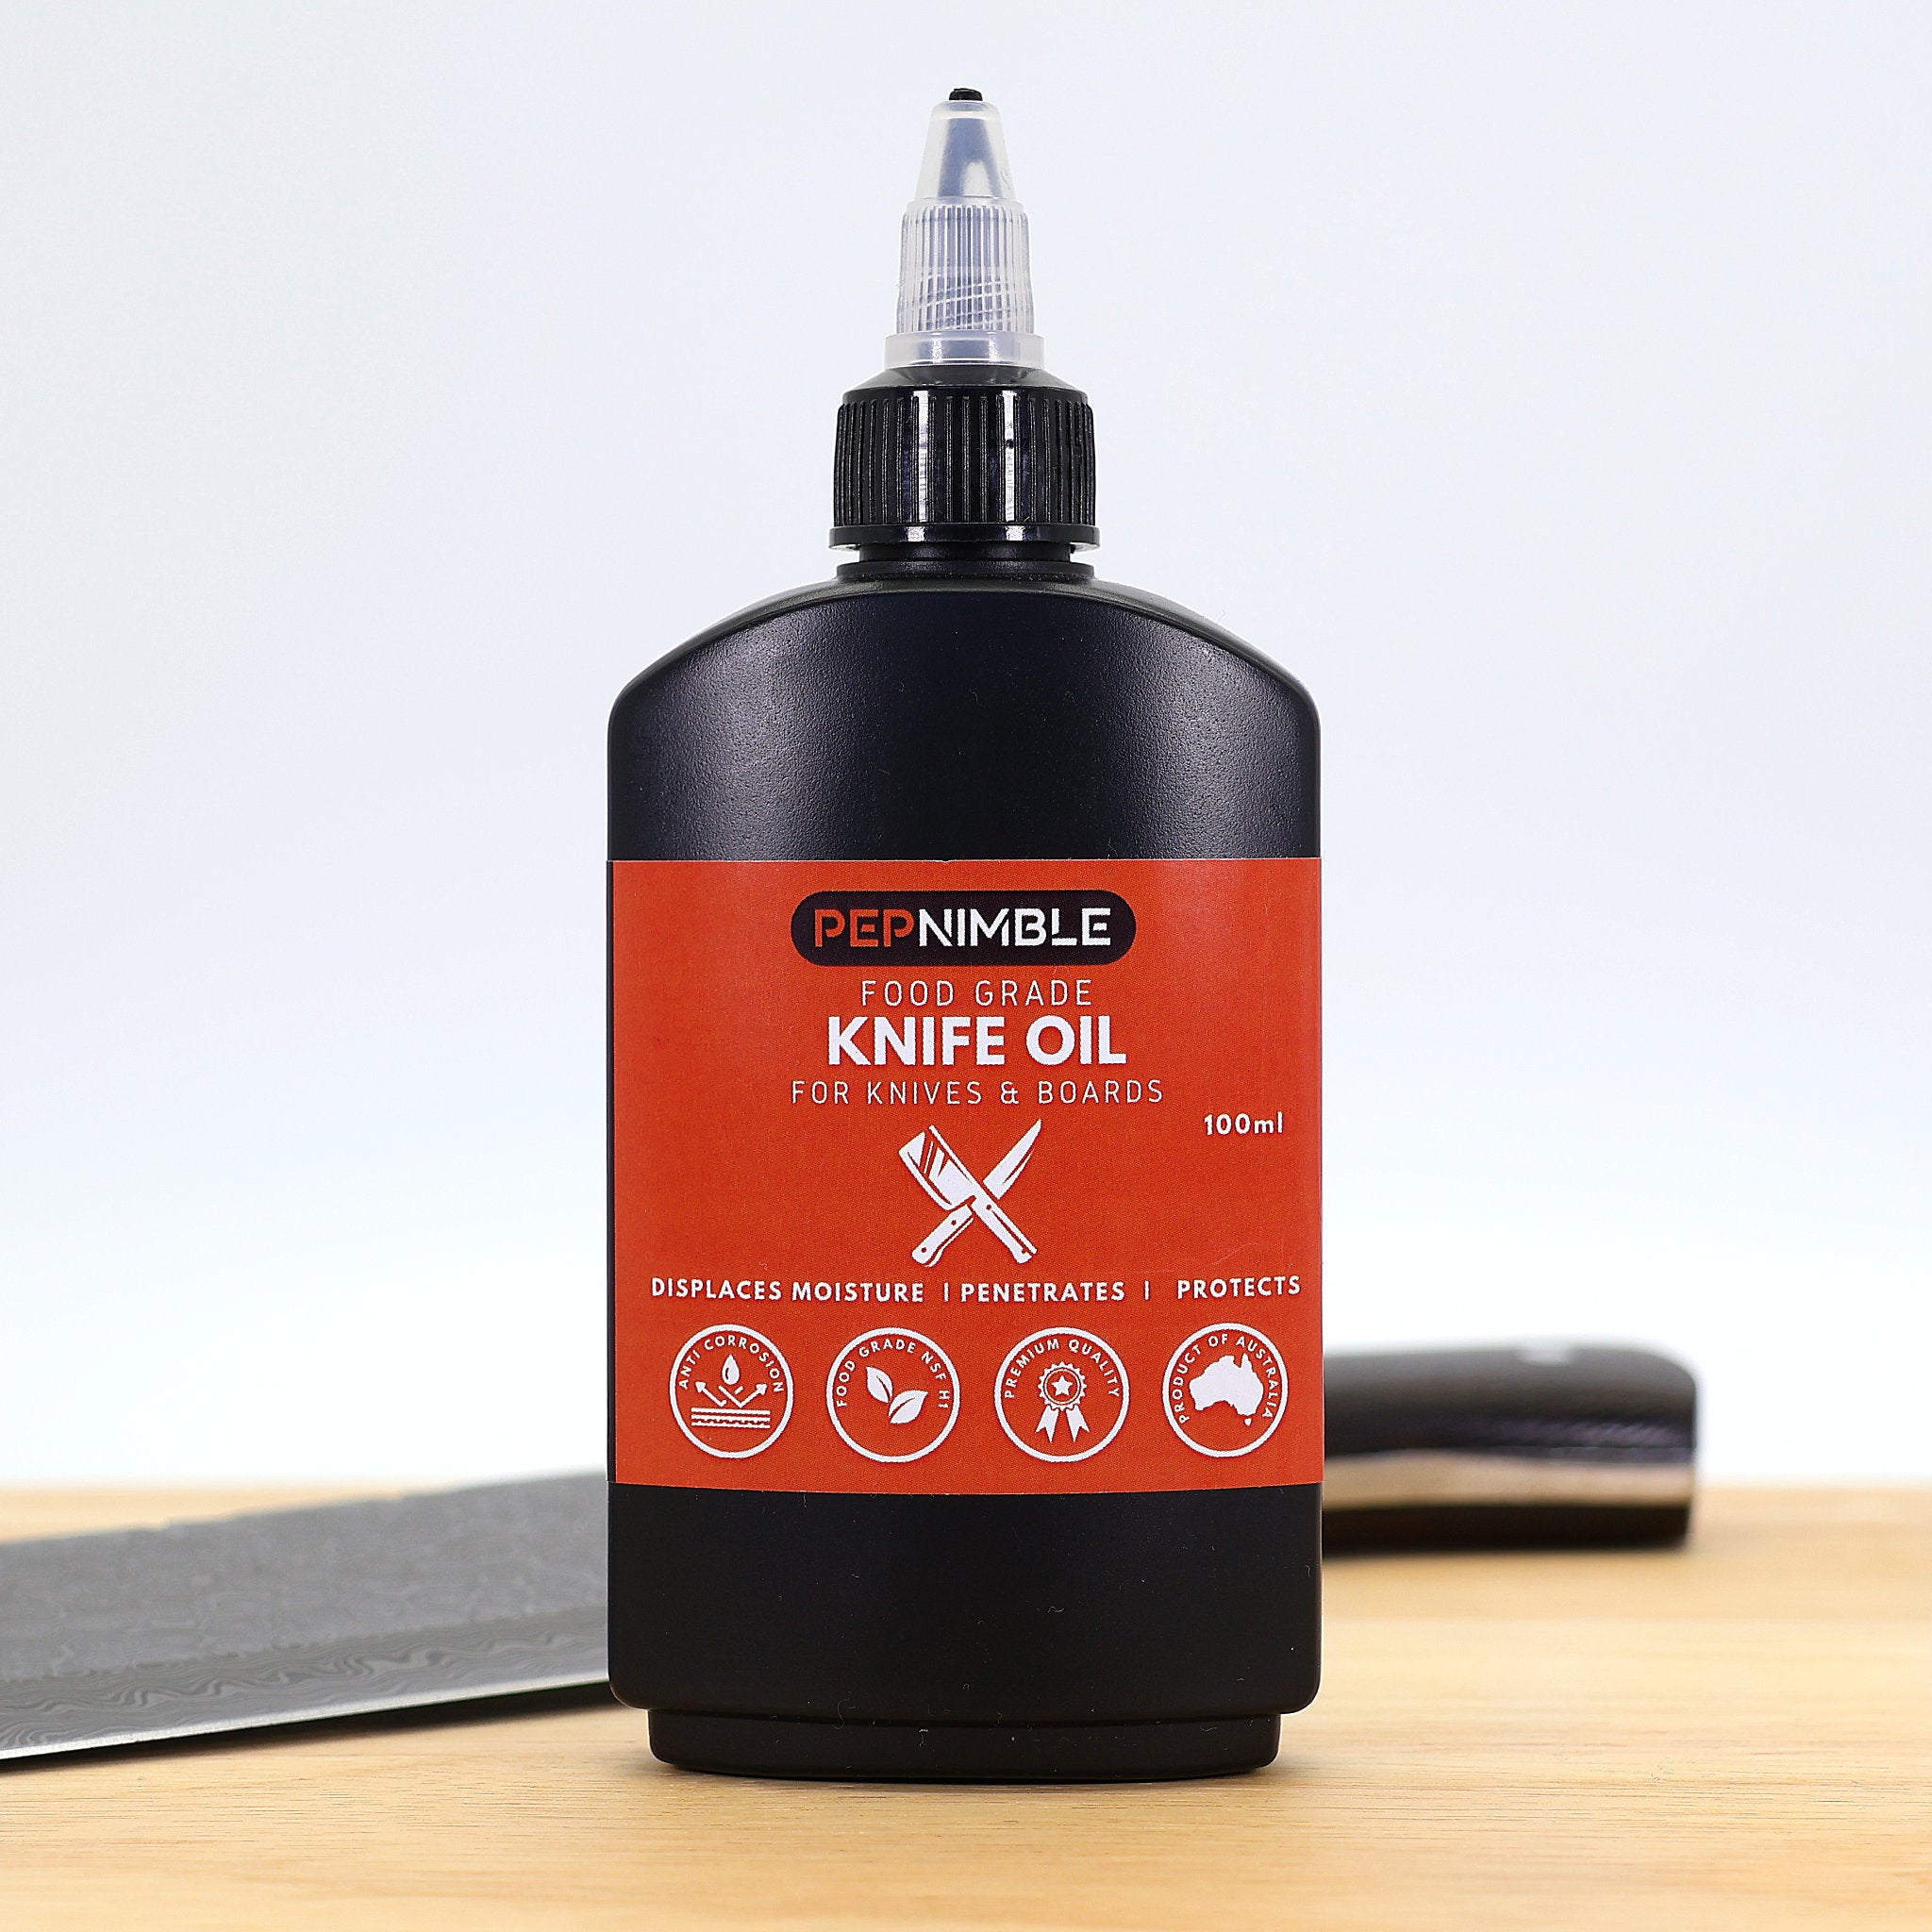 Knife Oil, Food Grade, for Knives, Blades and Chopping Boards, 100 ml